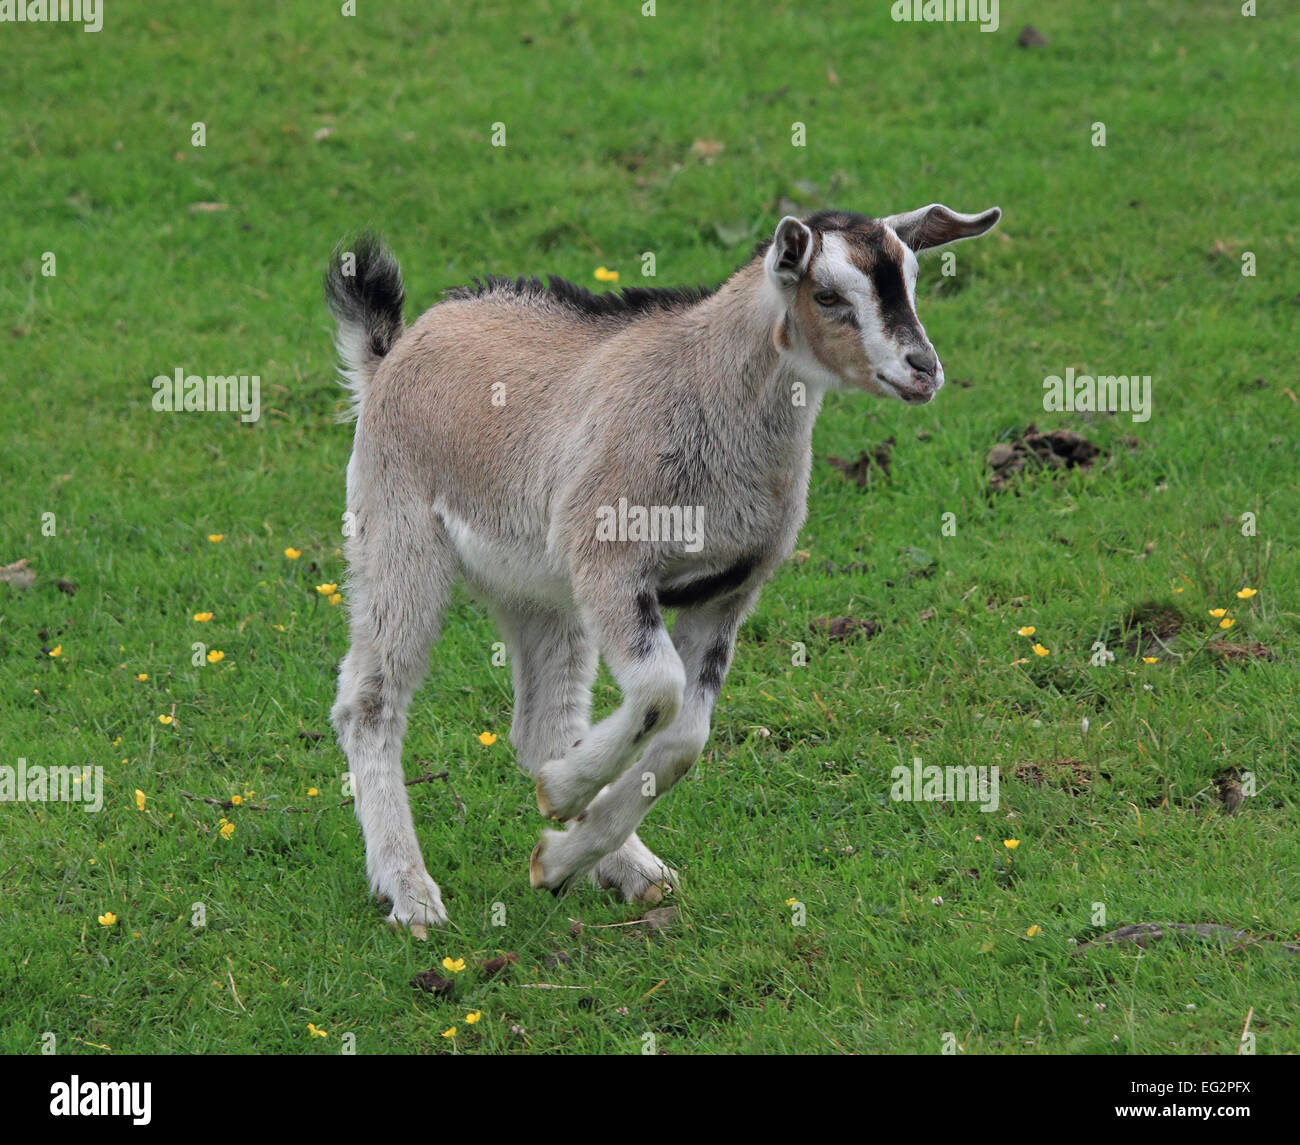 A young Goat running and playing in the grassy field Stock Photo